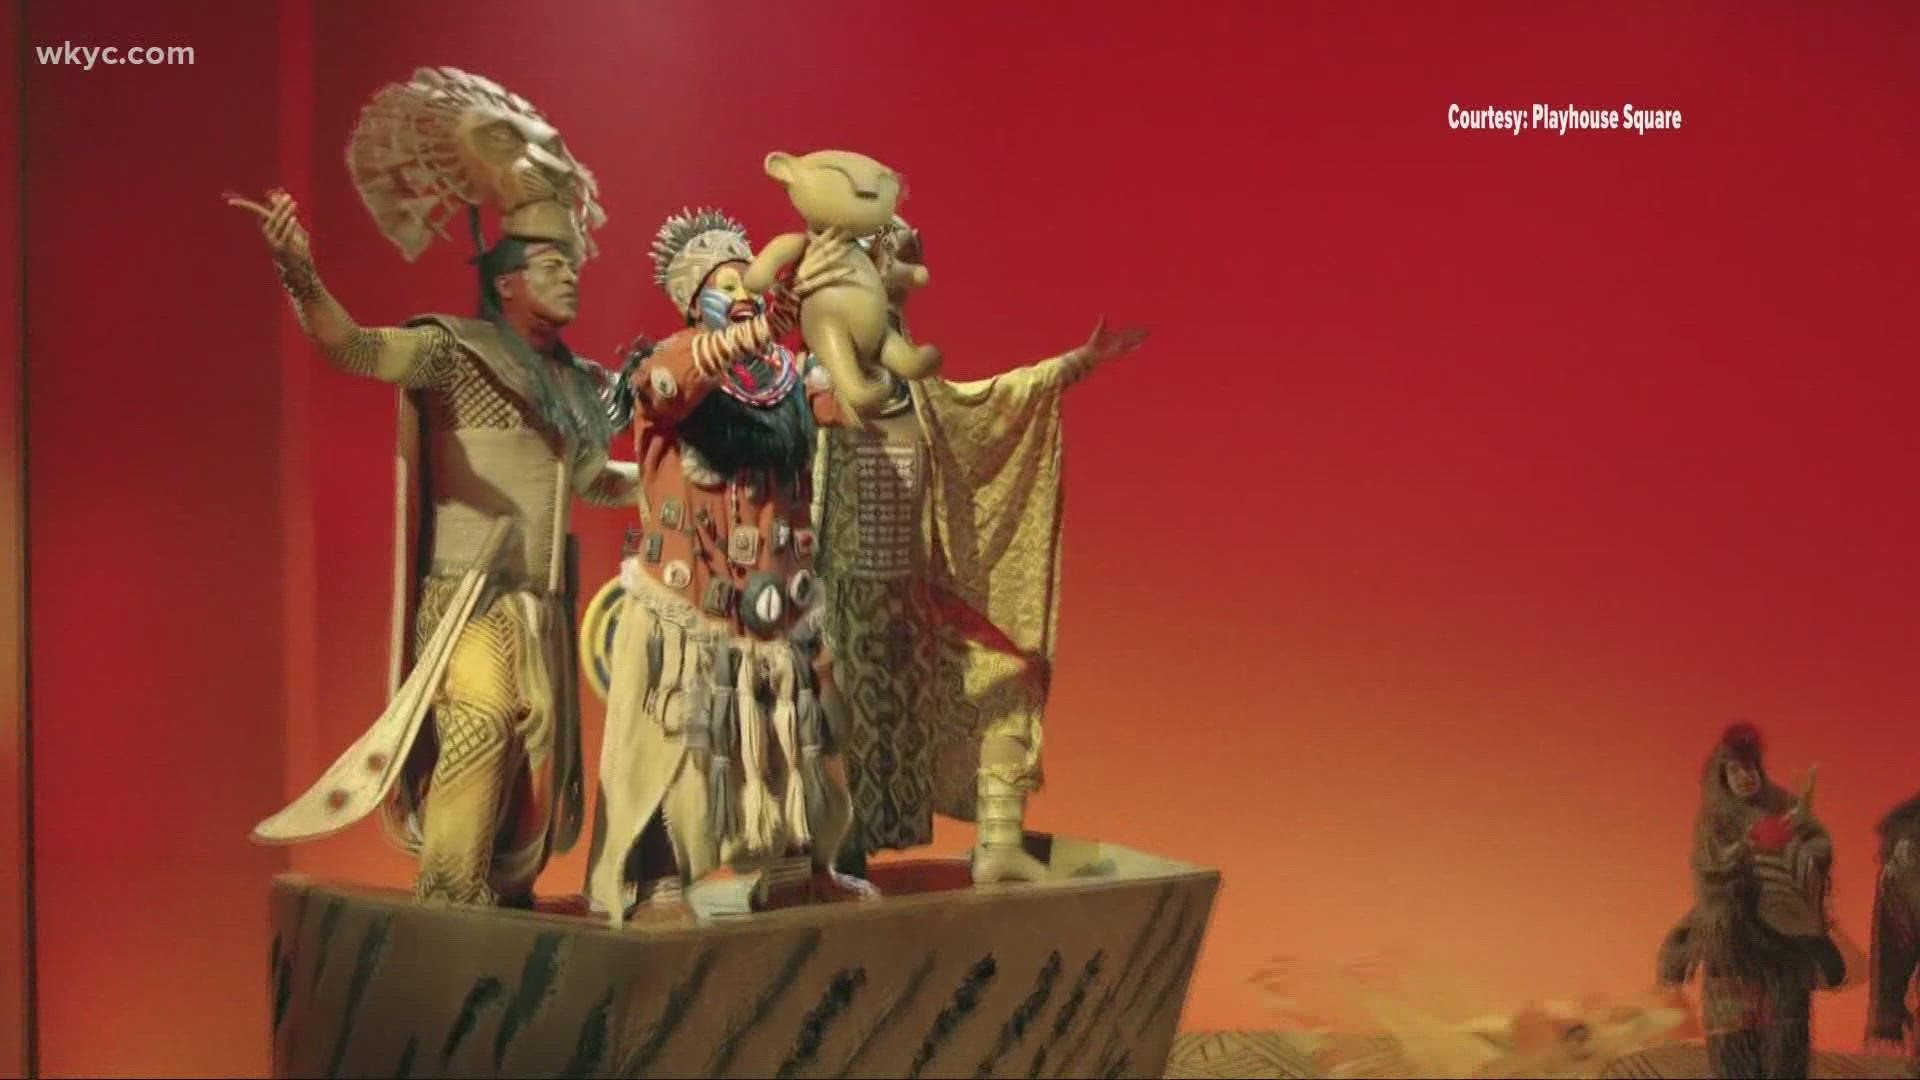 The Lion King is back at Playhouse Square from Oct. 1-15 at the KeyBank State Theatre.